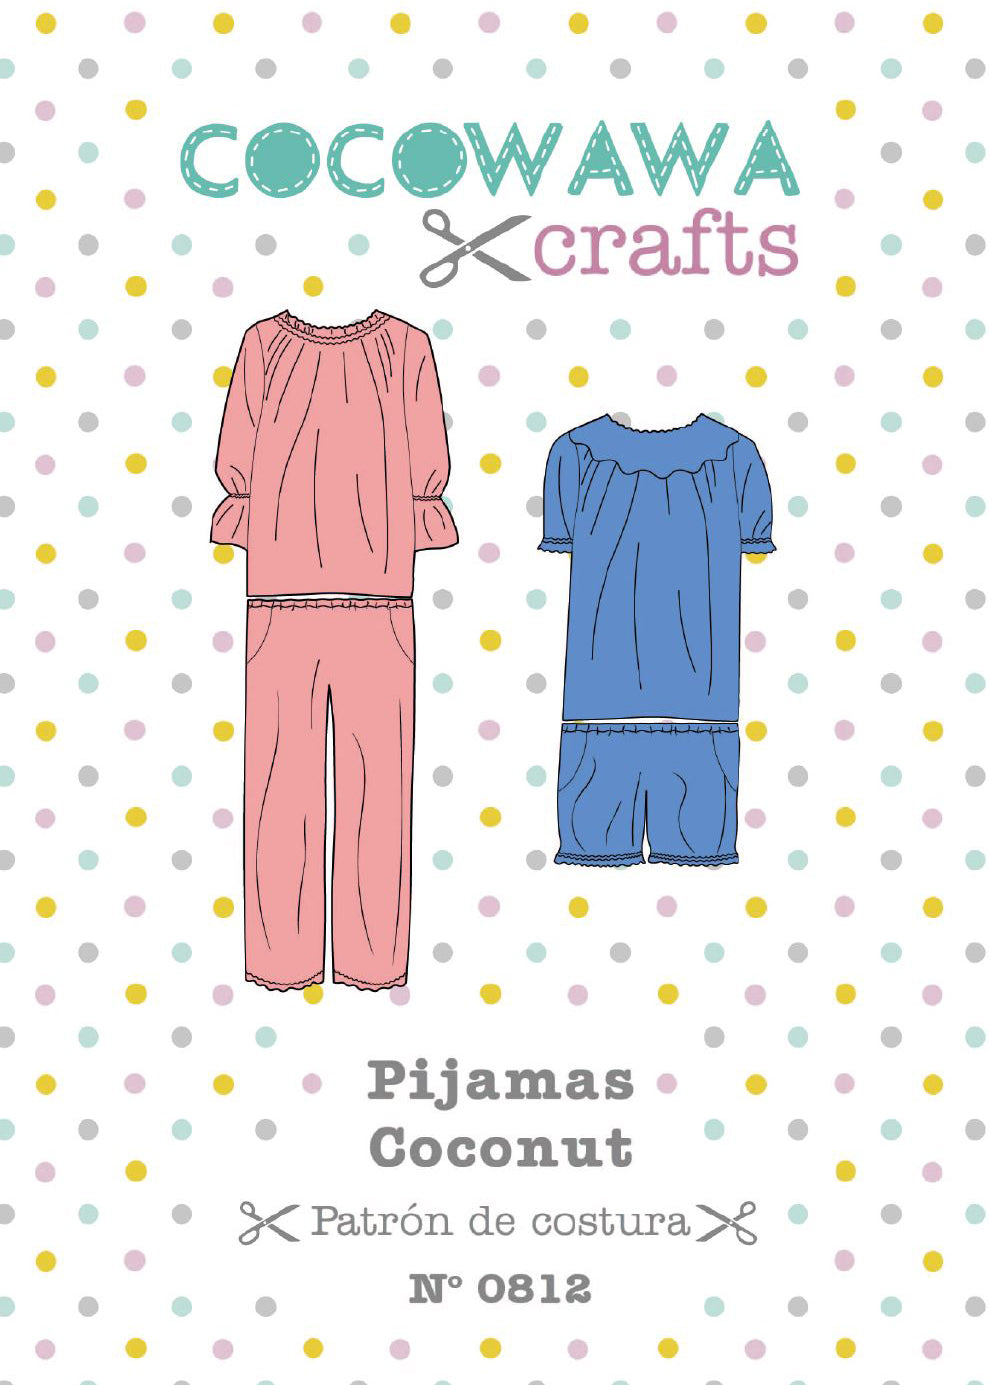 Spanish Cover Coconut Pjs sewing pattern CocoWawa Crafts